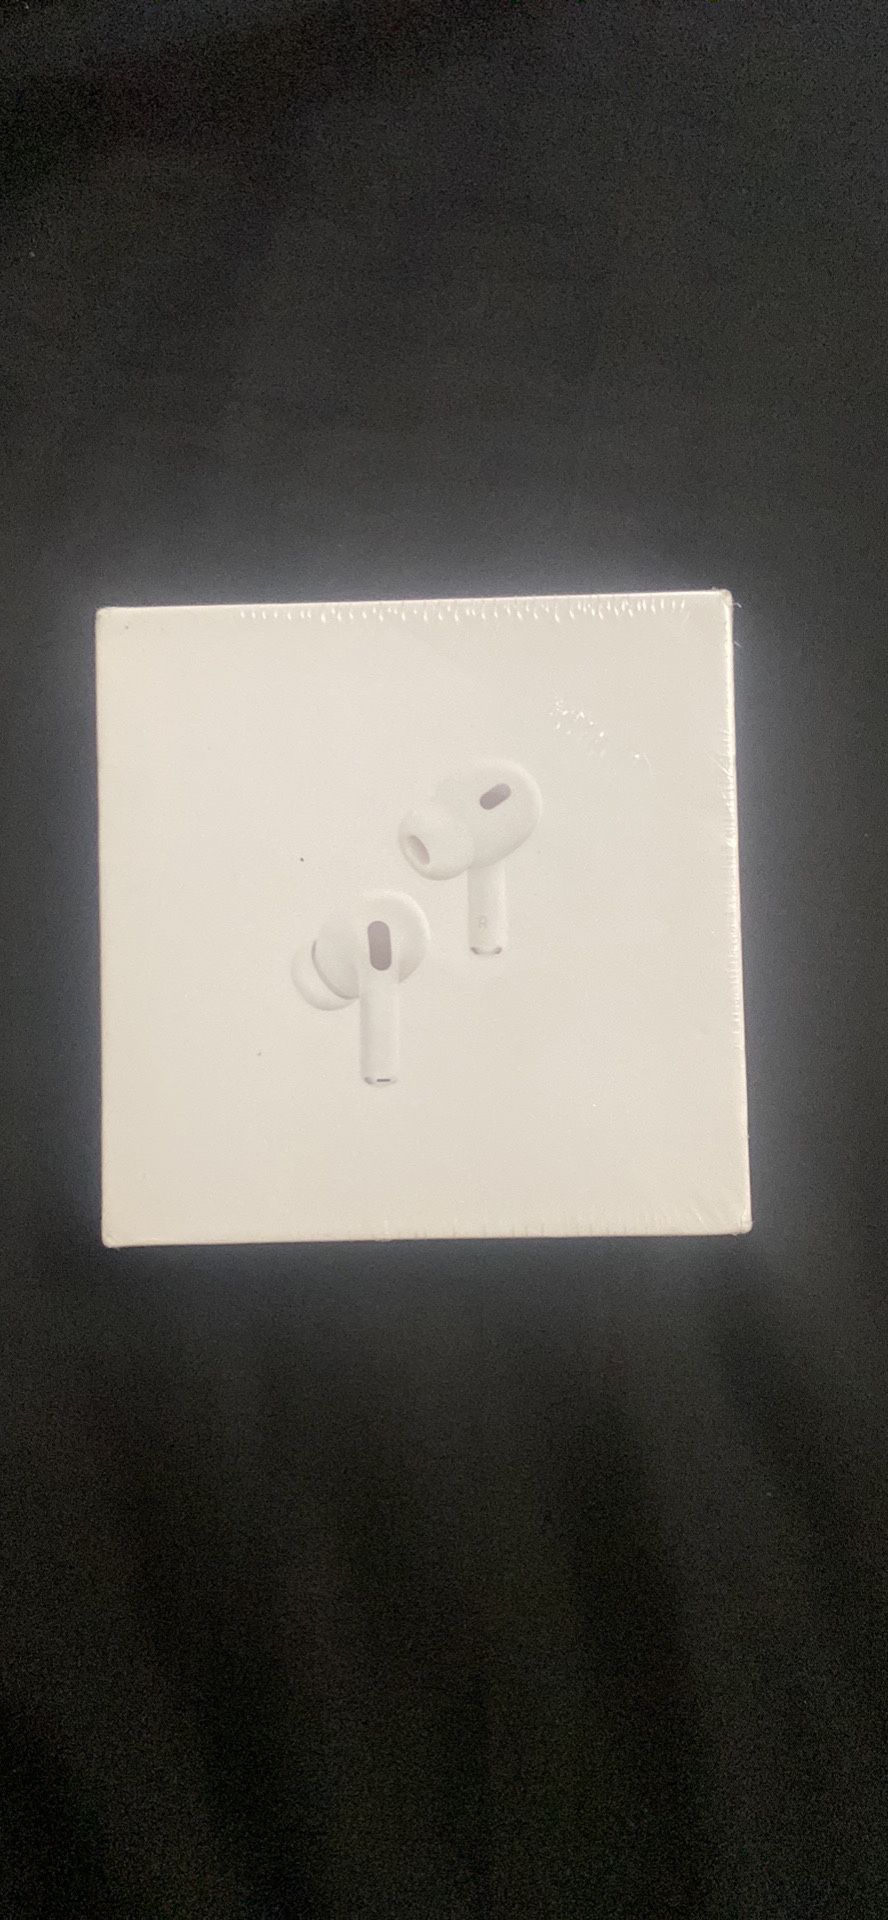 AirPods Pros 2 Generation 